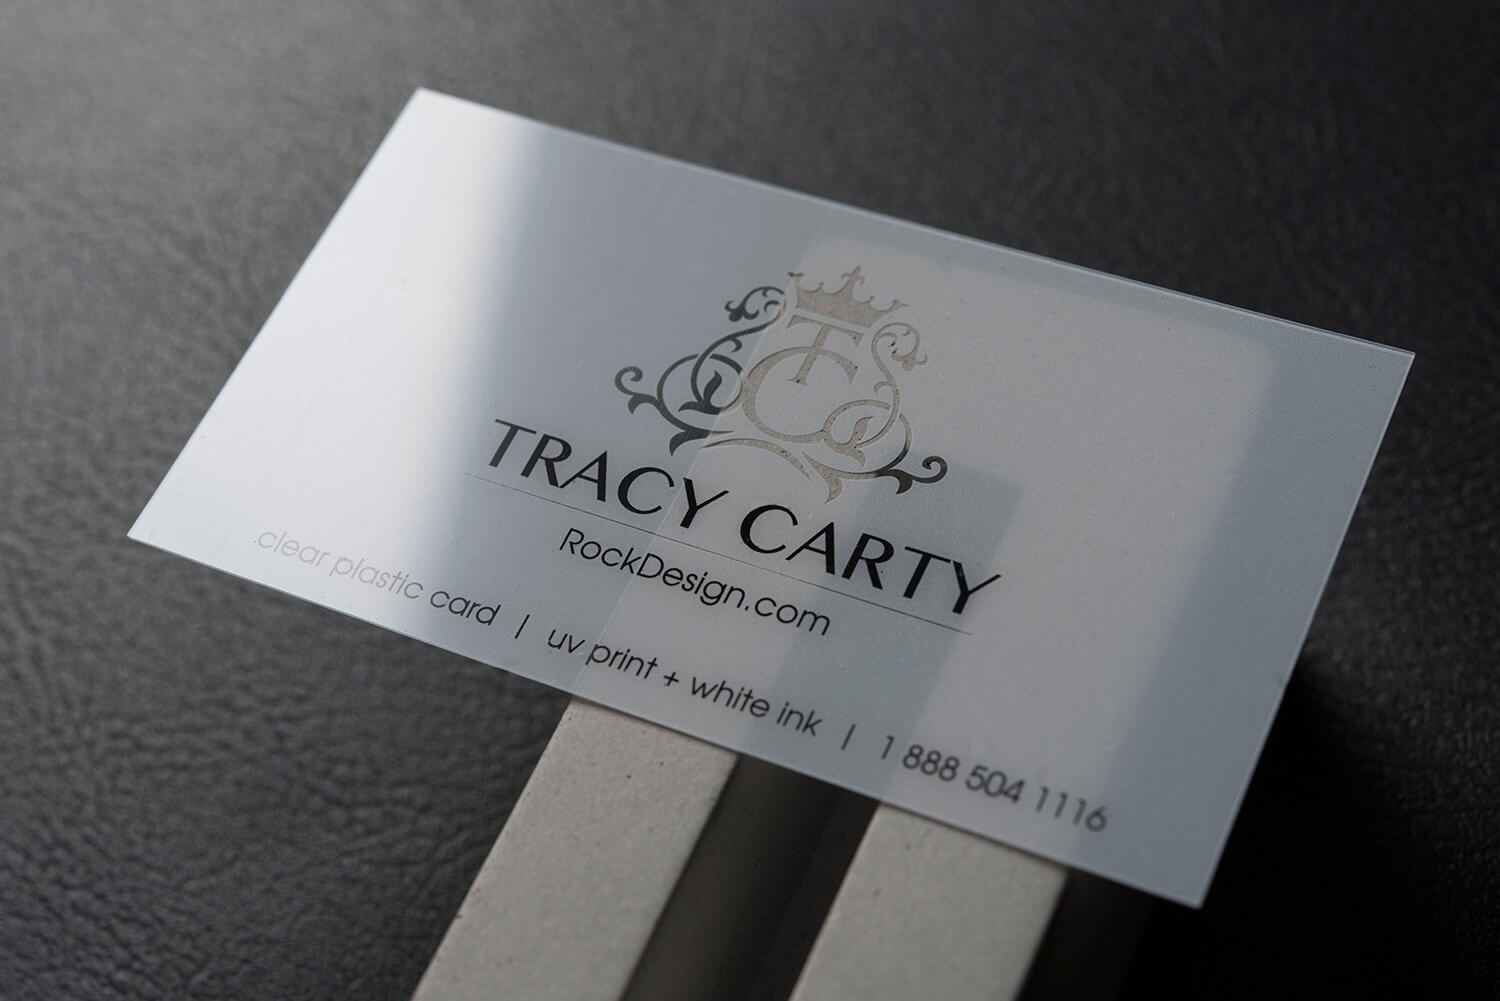 Elegant Transparent Plastic Name Card Design – Tracy Carty Pertaining To Transparent Business Cards Template